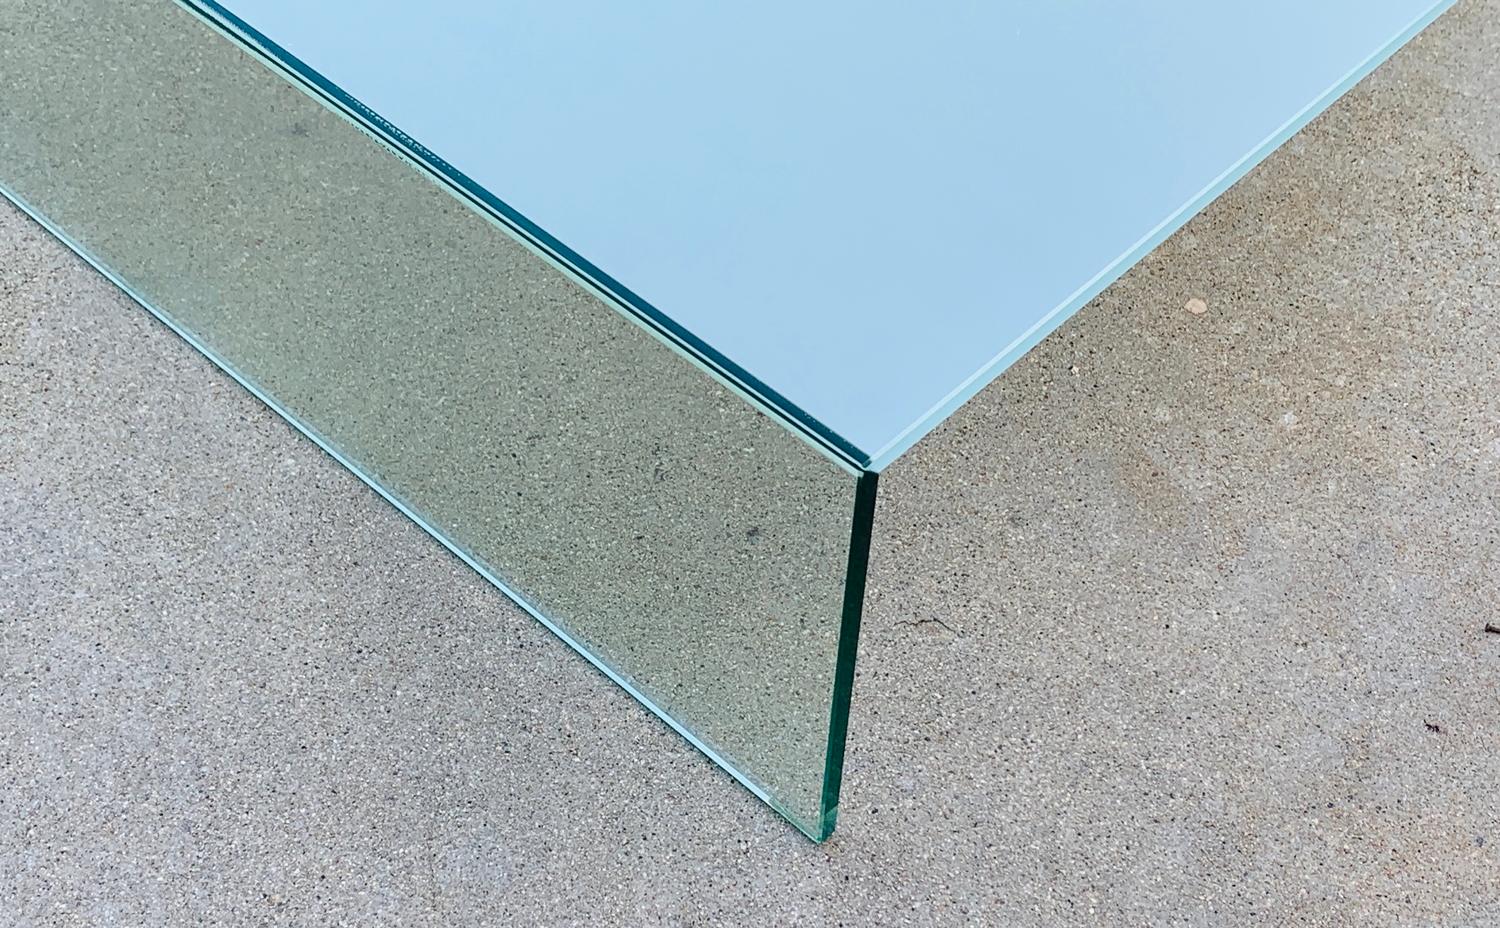 Introducing the exquisite Glass Coffee Table by Piero Lissoni for Glas Italia, Italy 2018. This stunning piece combines modern design, Italian craftsmanship, and a touch of elegance to elevate any living space.

The table features a sleek and